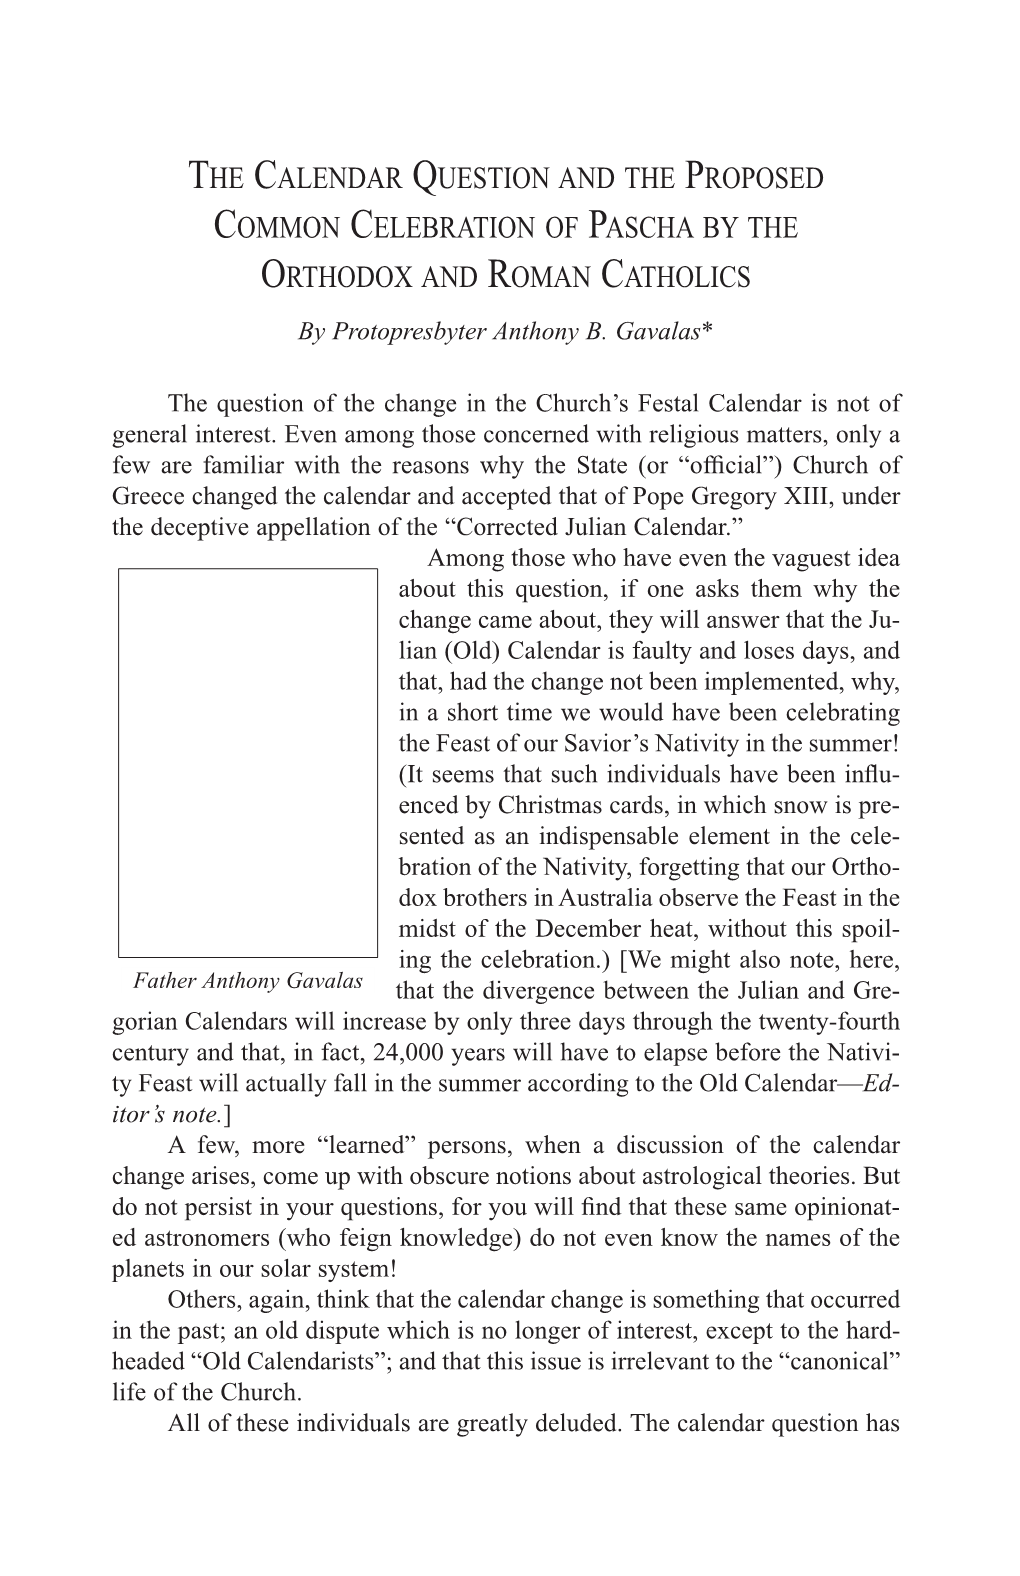 THE CALENDAR QUESTION and the PROPOSED COMMON CELEBRATION of PASCHA by the ORTHODOX and ROMAN CATHOLICS by Protopresbyter Anthony B